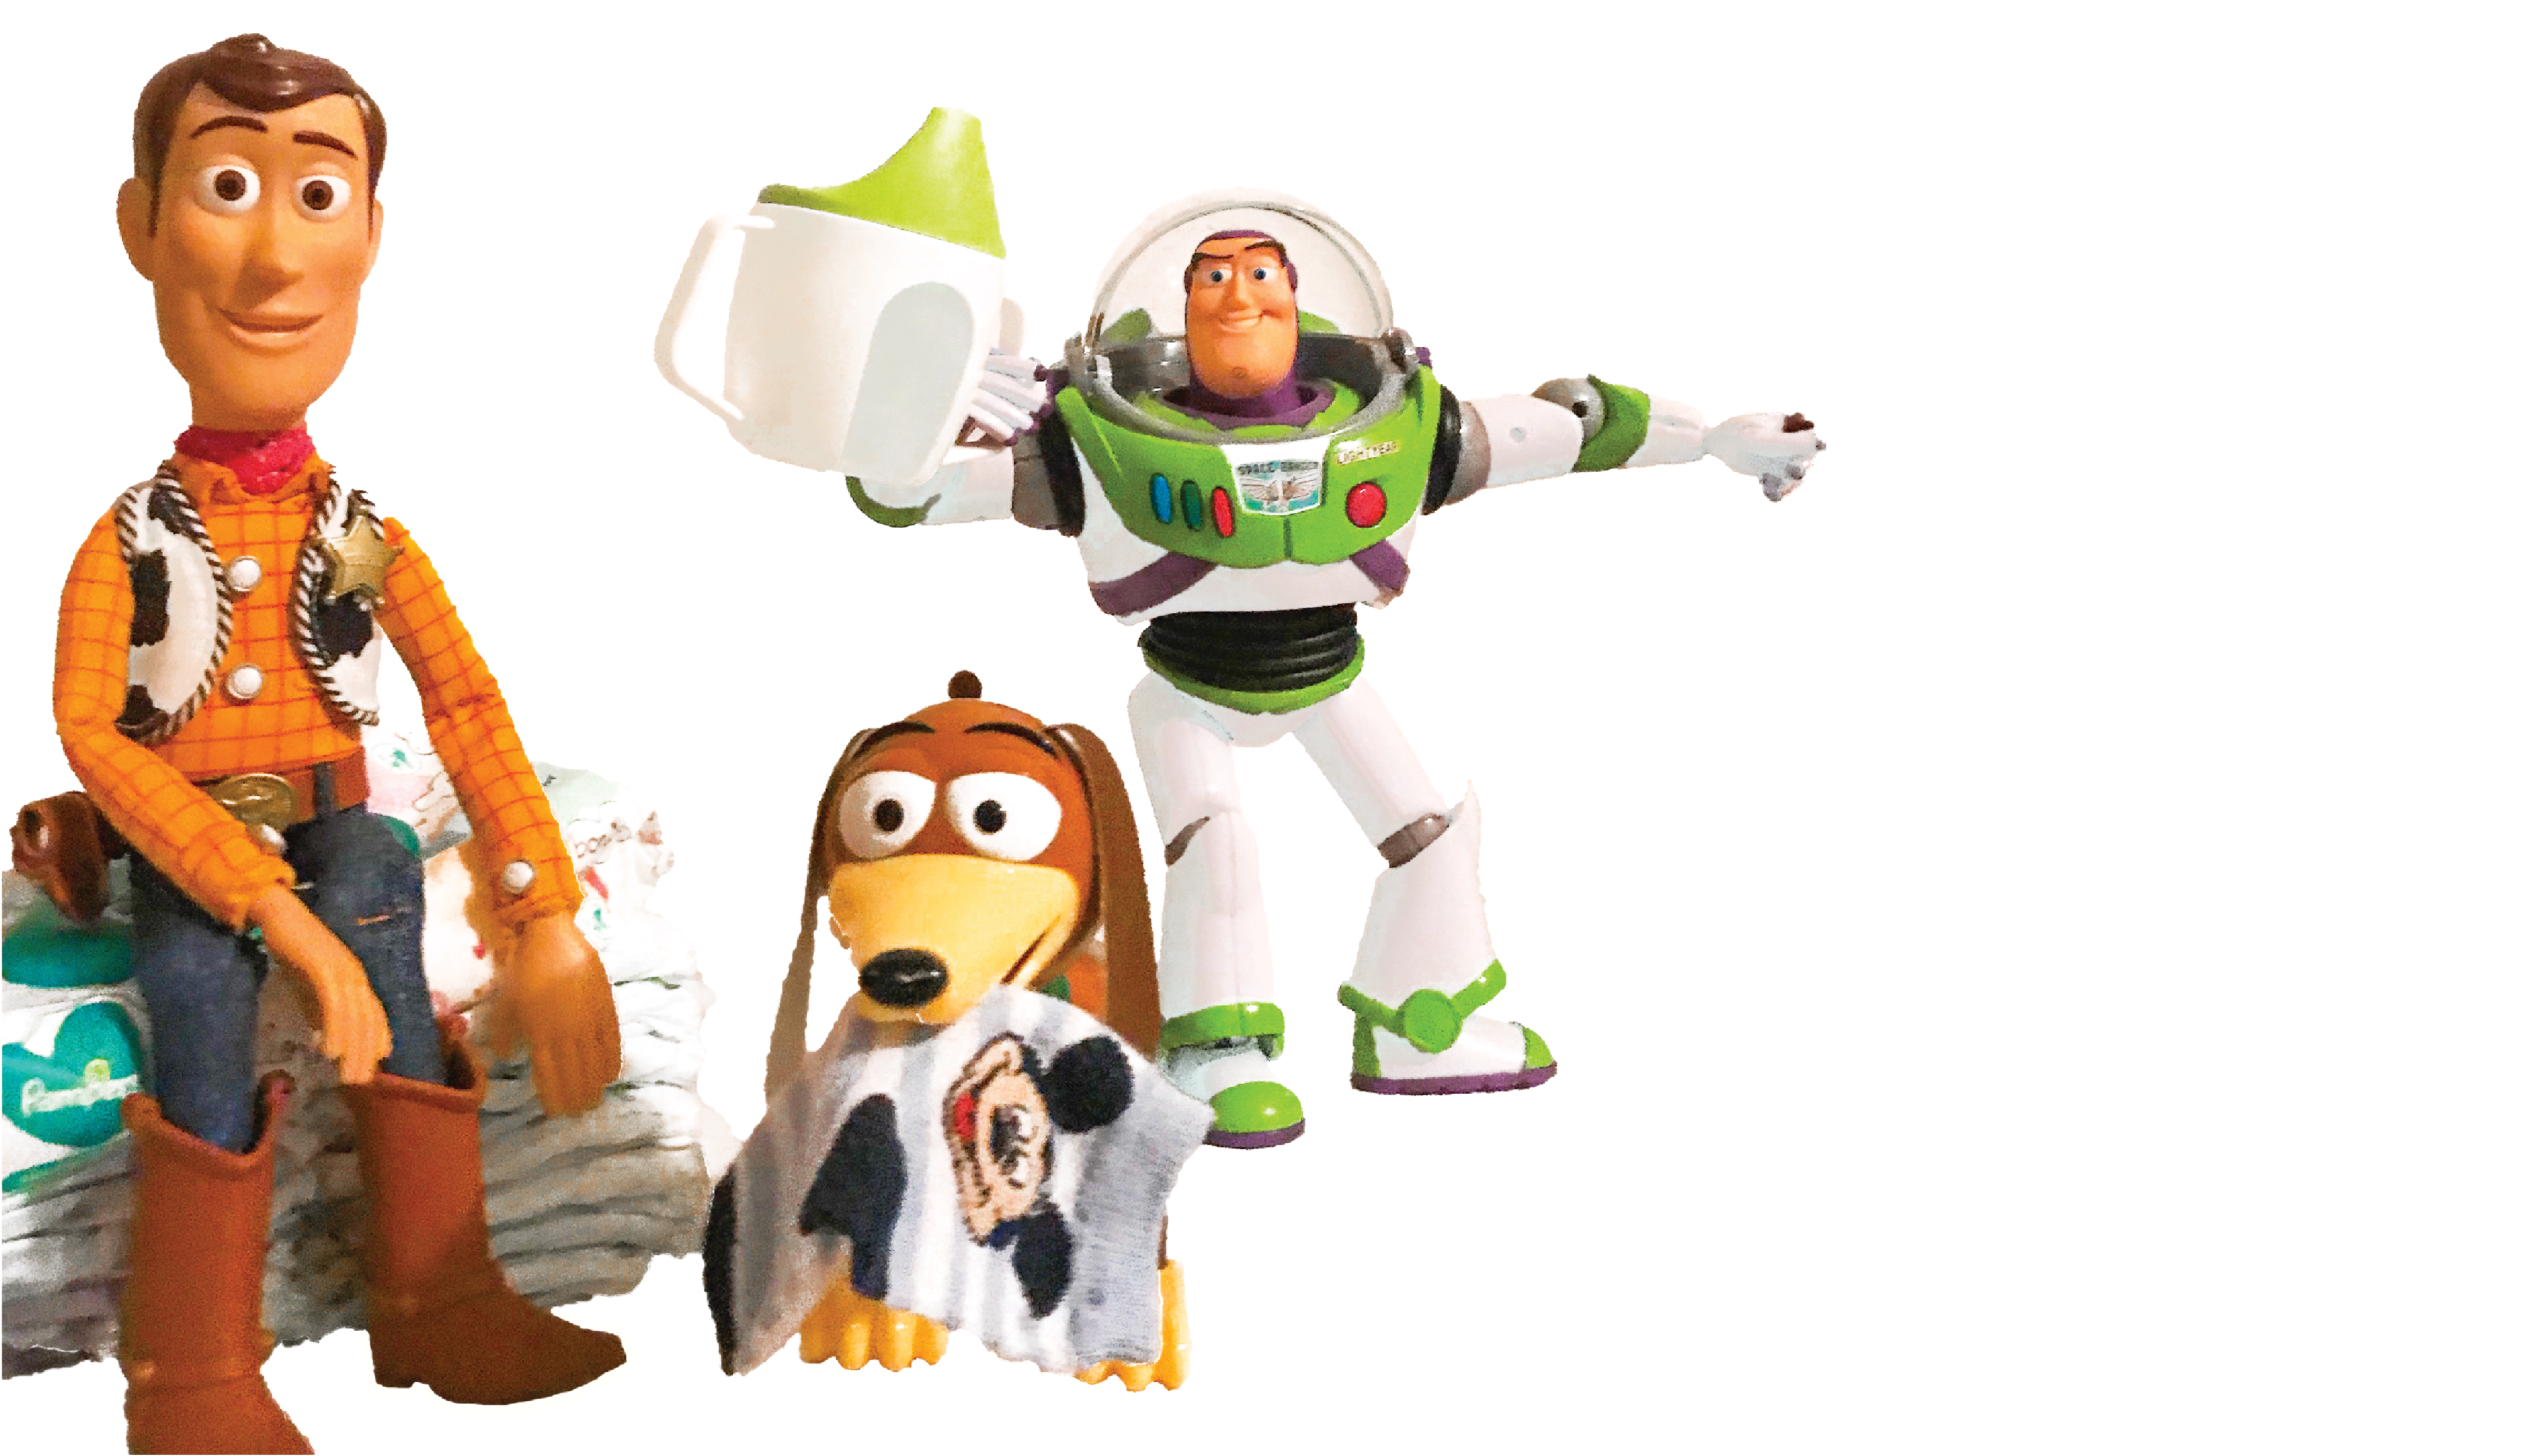 Buzz sitting on diapers, Slinky dog holding a mickey sock, and Buzz Lightyear holding a sippy cup